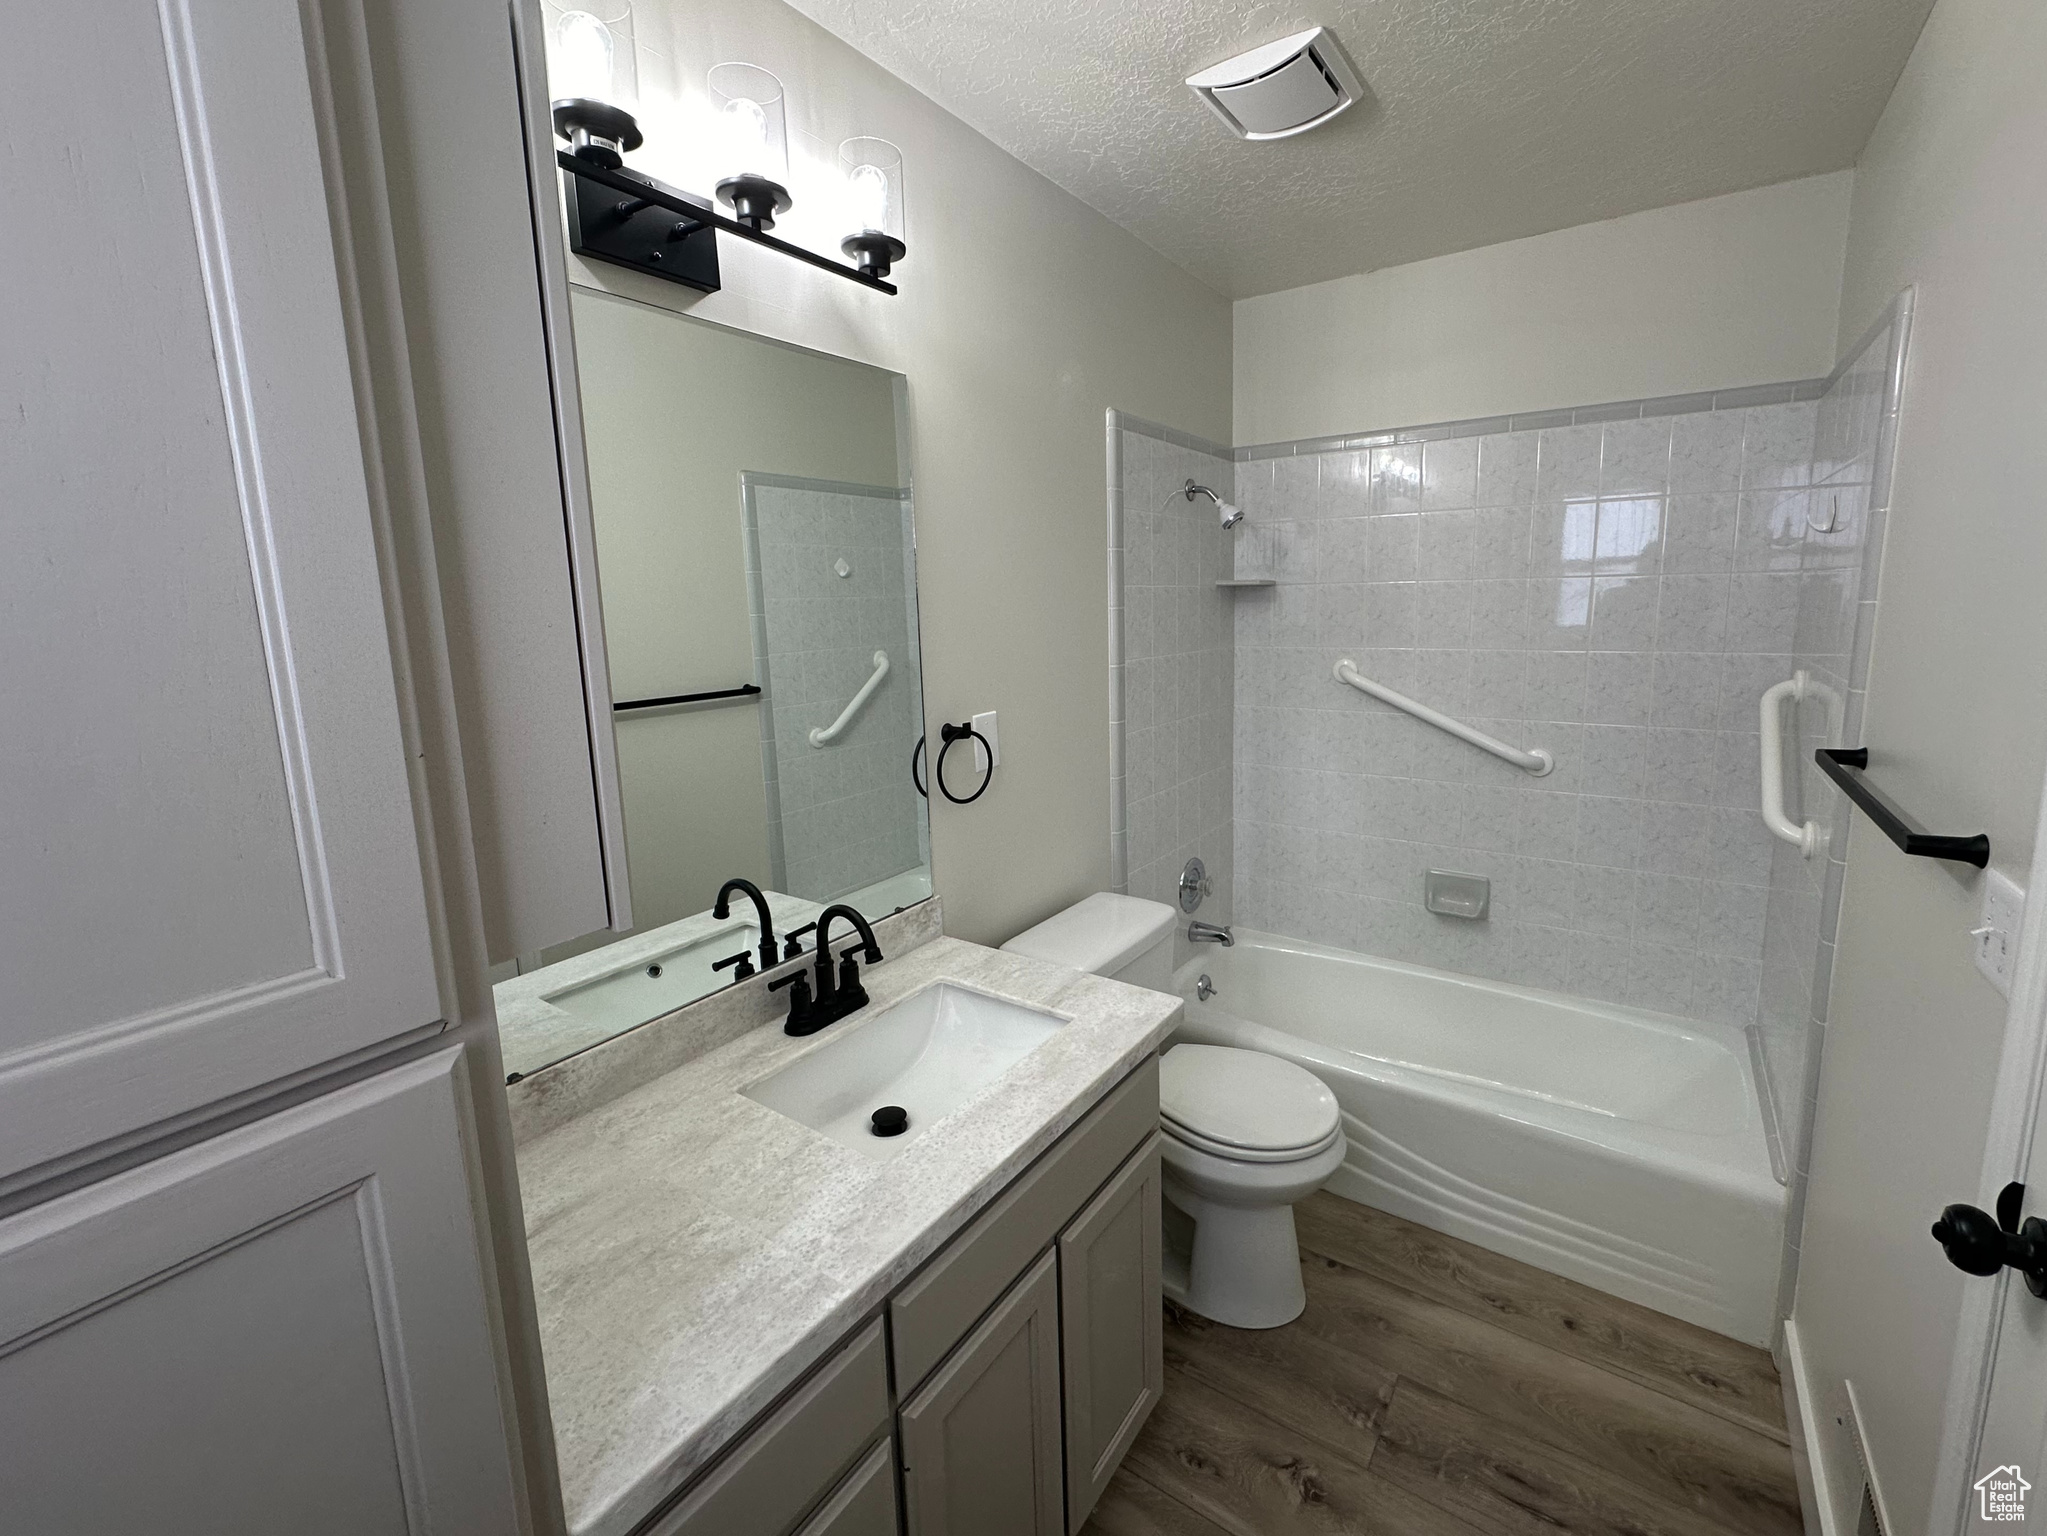 Full bathroom with toilet, large vanity, wood-type flooring, tiled shower / bath, and a textured ceiling